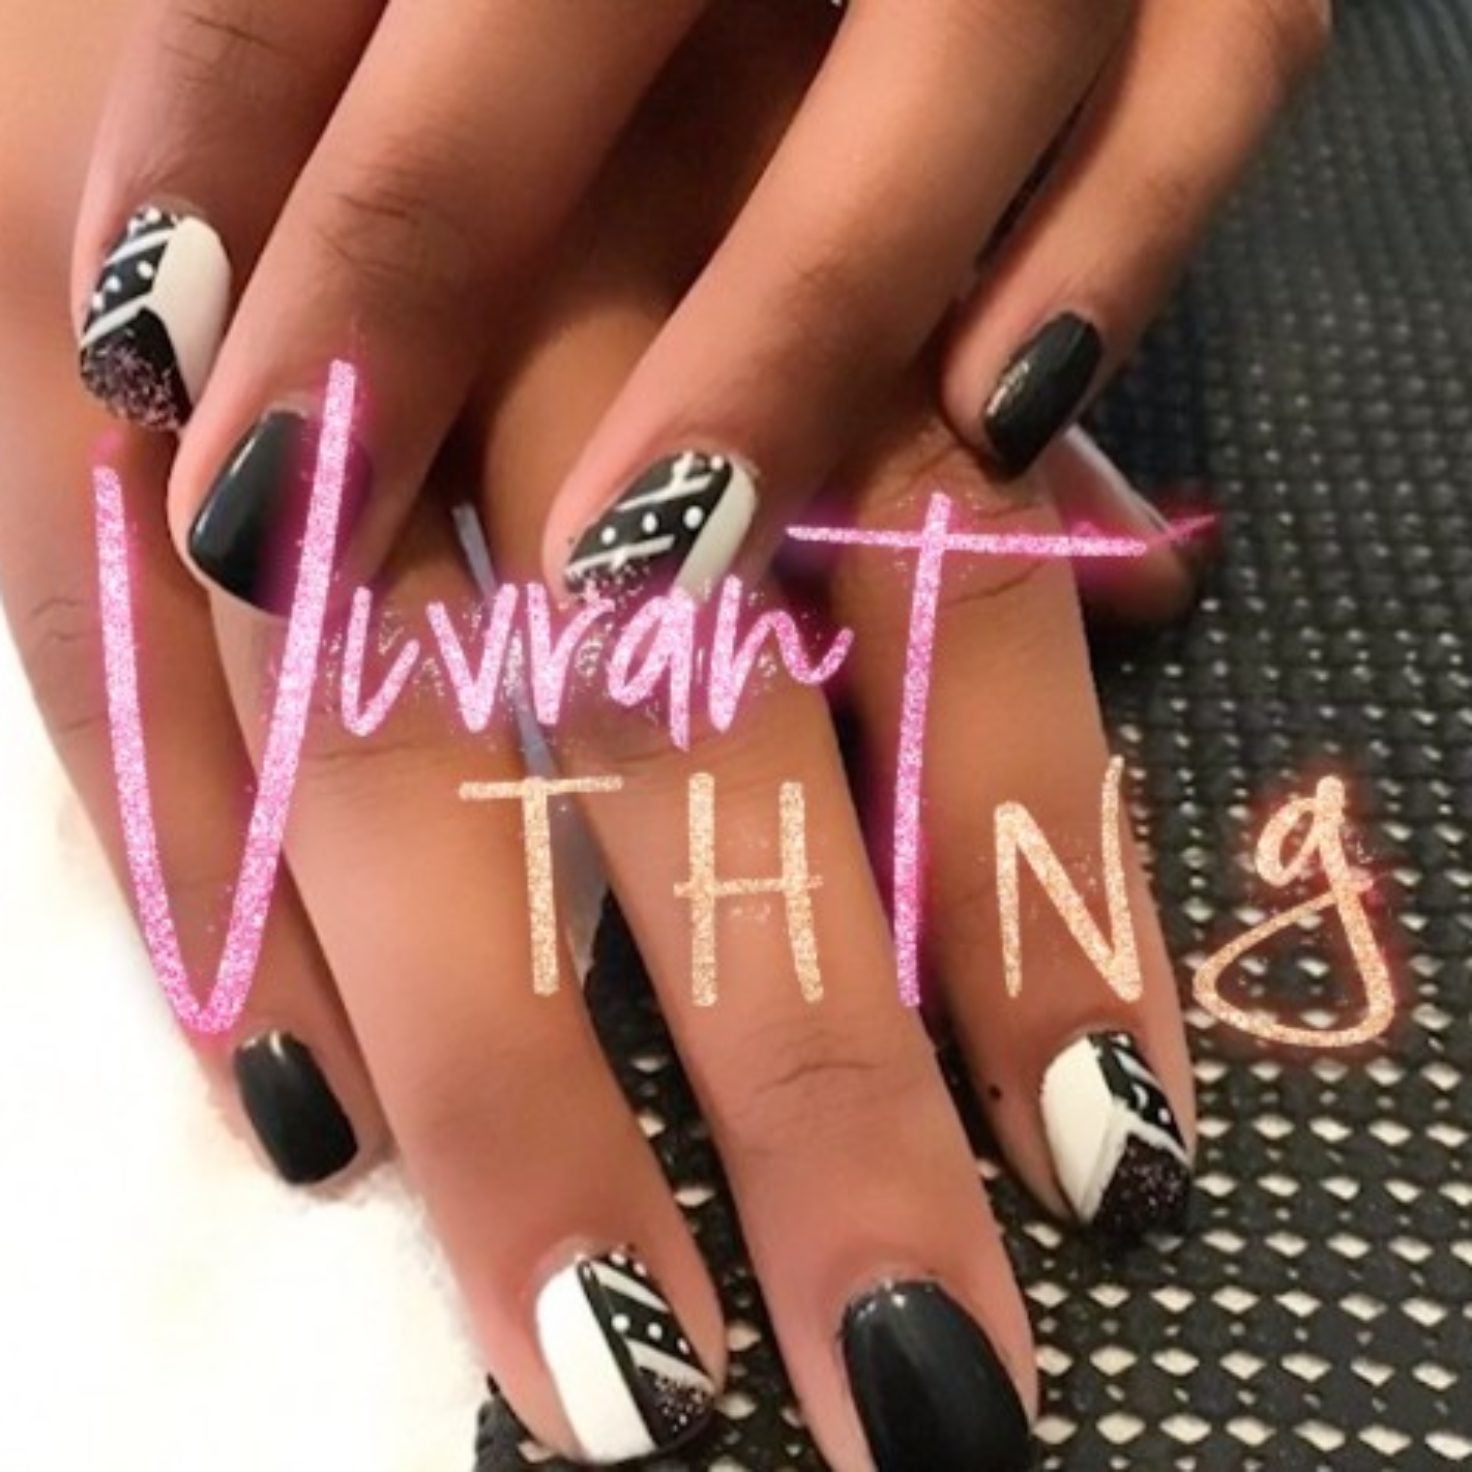 Watch ‘Vivrant Thing’: Find Out What's Trending In Nails With Celebrity Manicurist Sunshine